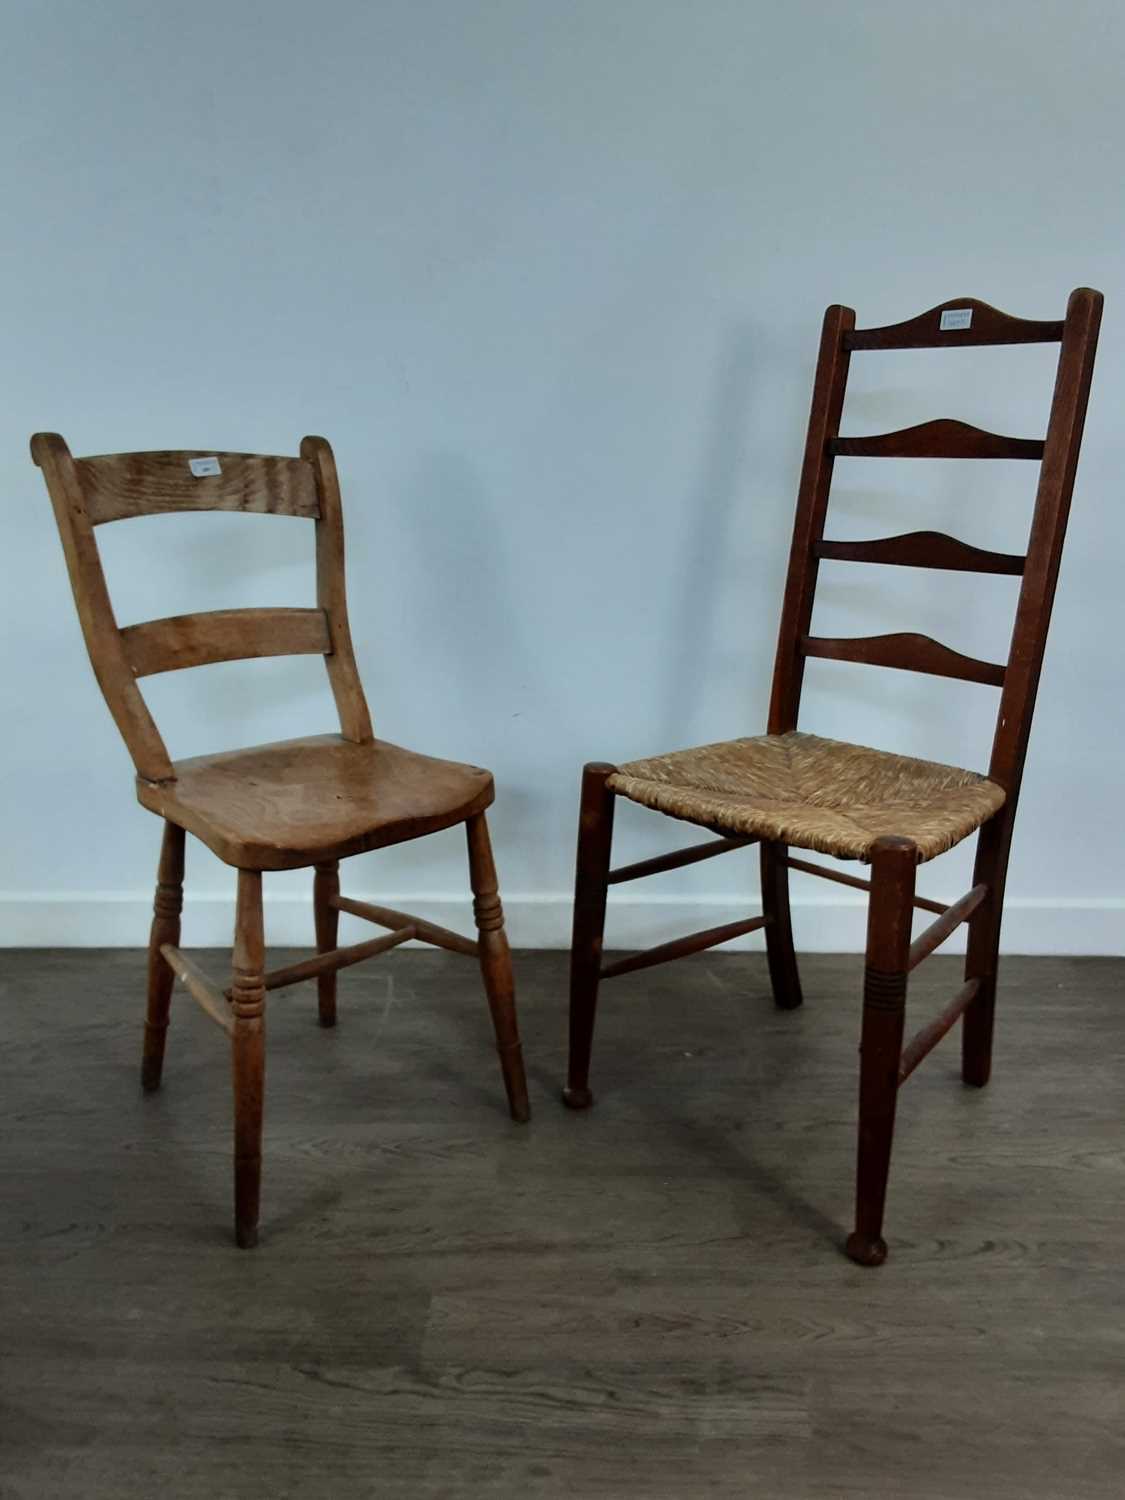 TWO BEDROOM CHAIRS, AND A KITCHEN CHAIR